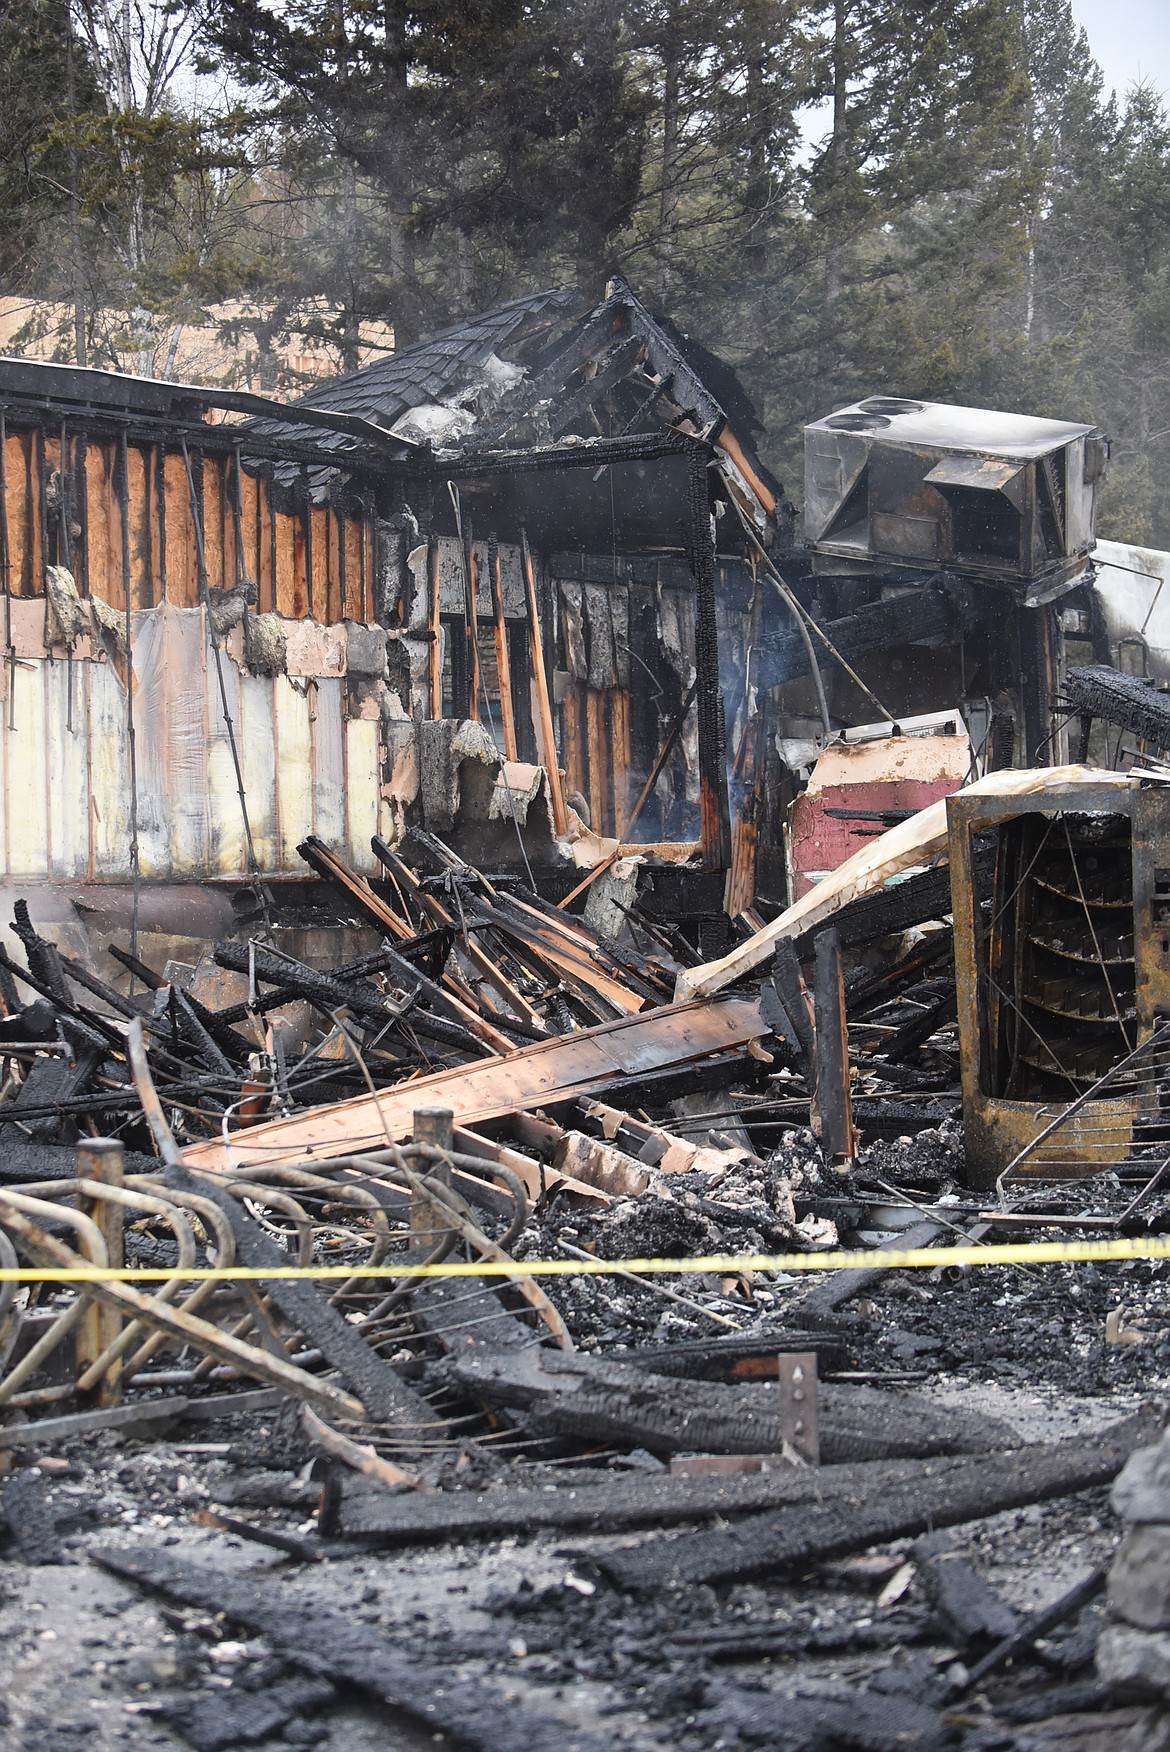 Mostly charred remains are all that was left after a fire destroyed the Eagle Bend Golf Club in Bigfork early Sunday morning. (Scott Shindledecker/Daily Inter Lake)